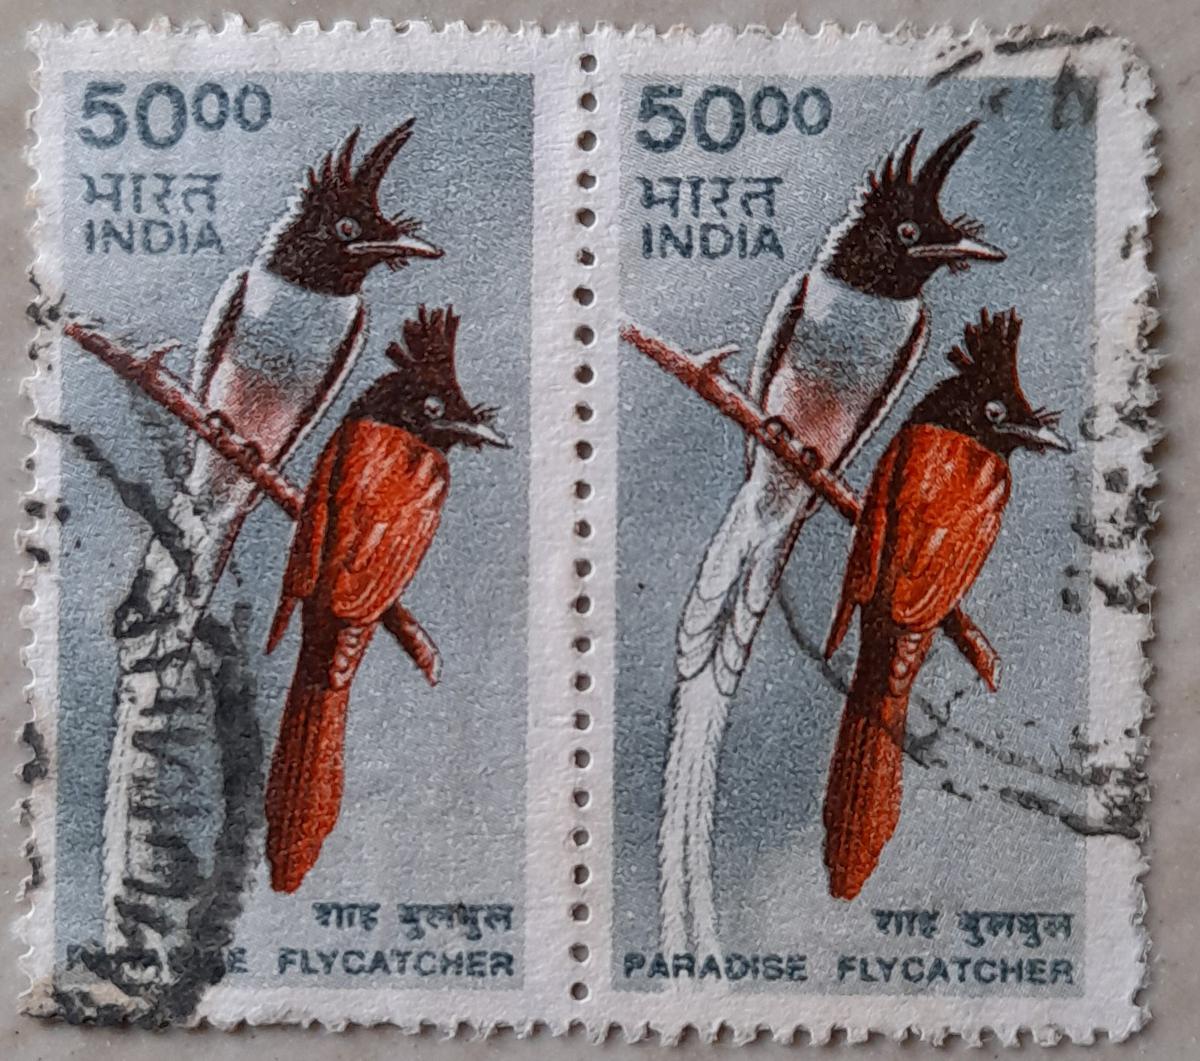 From P Jeganathan’s stamp collection